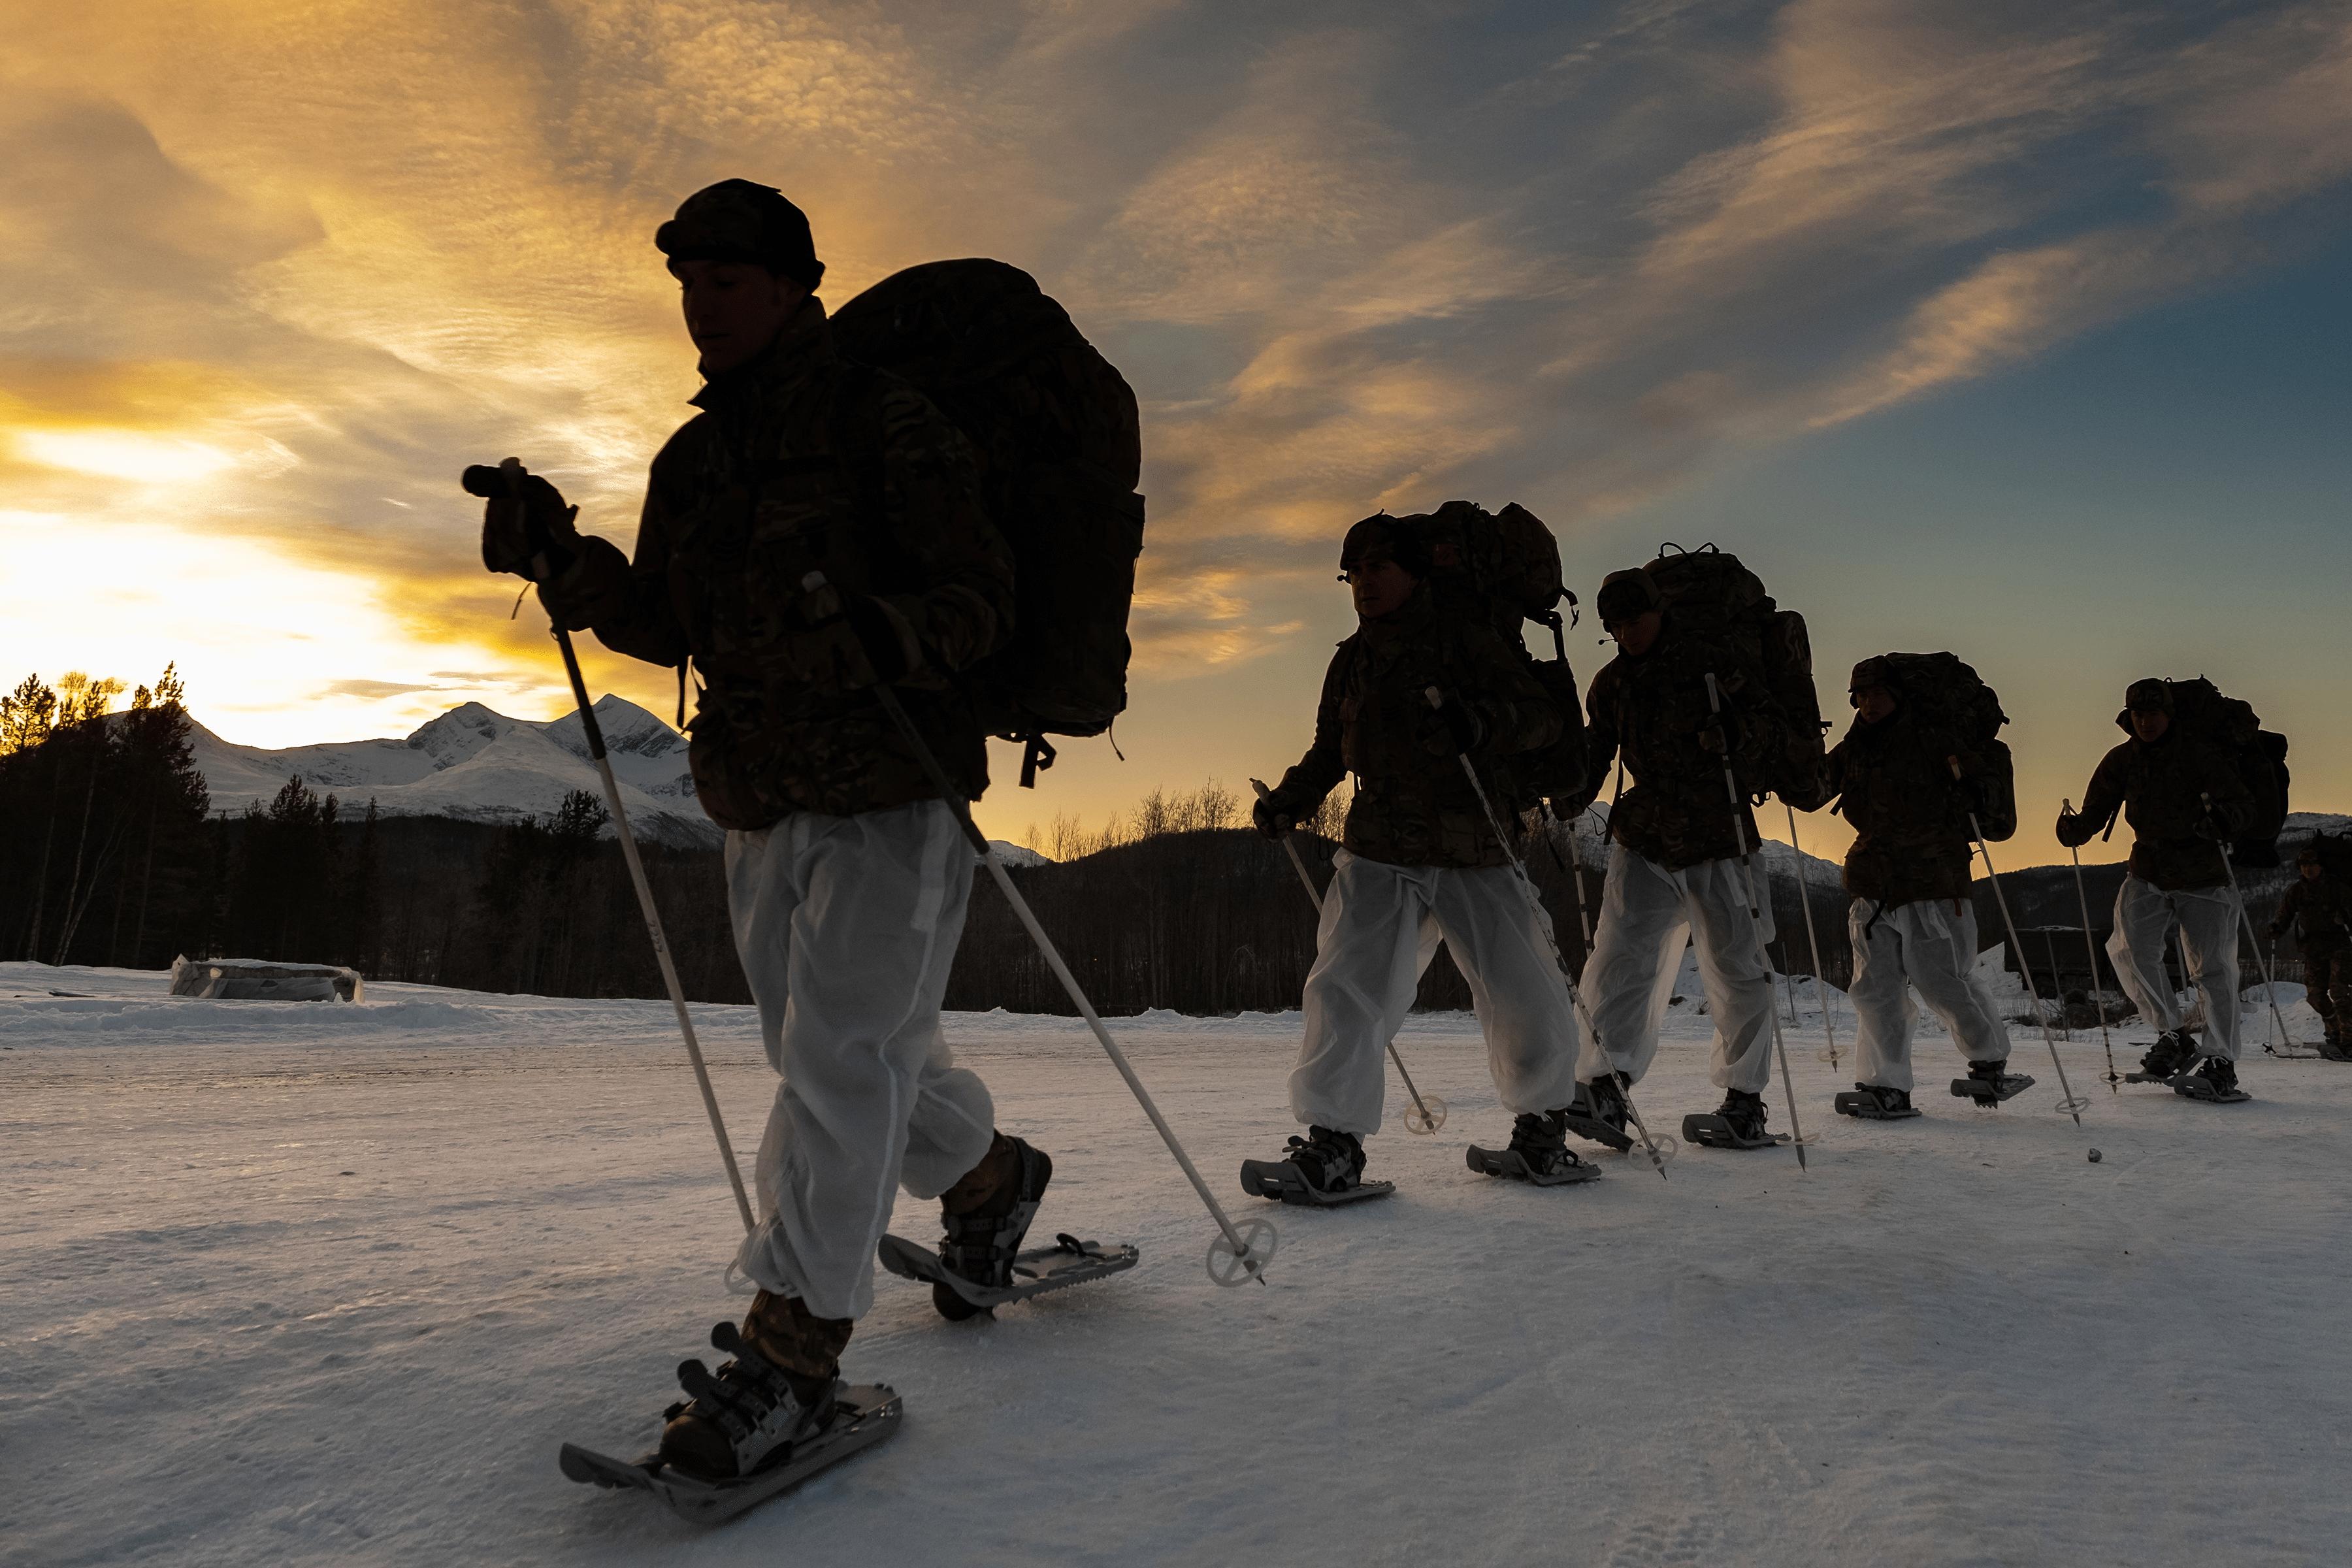 Group of soldiers at dusk, marching through the snow on snow shoes and using ski poles, all wearing heavy backpacks